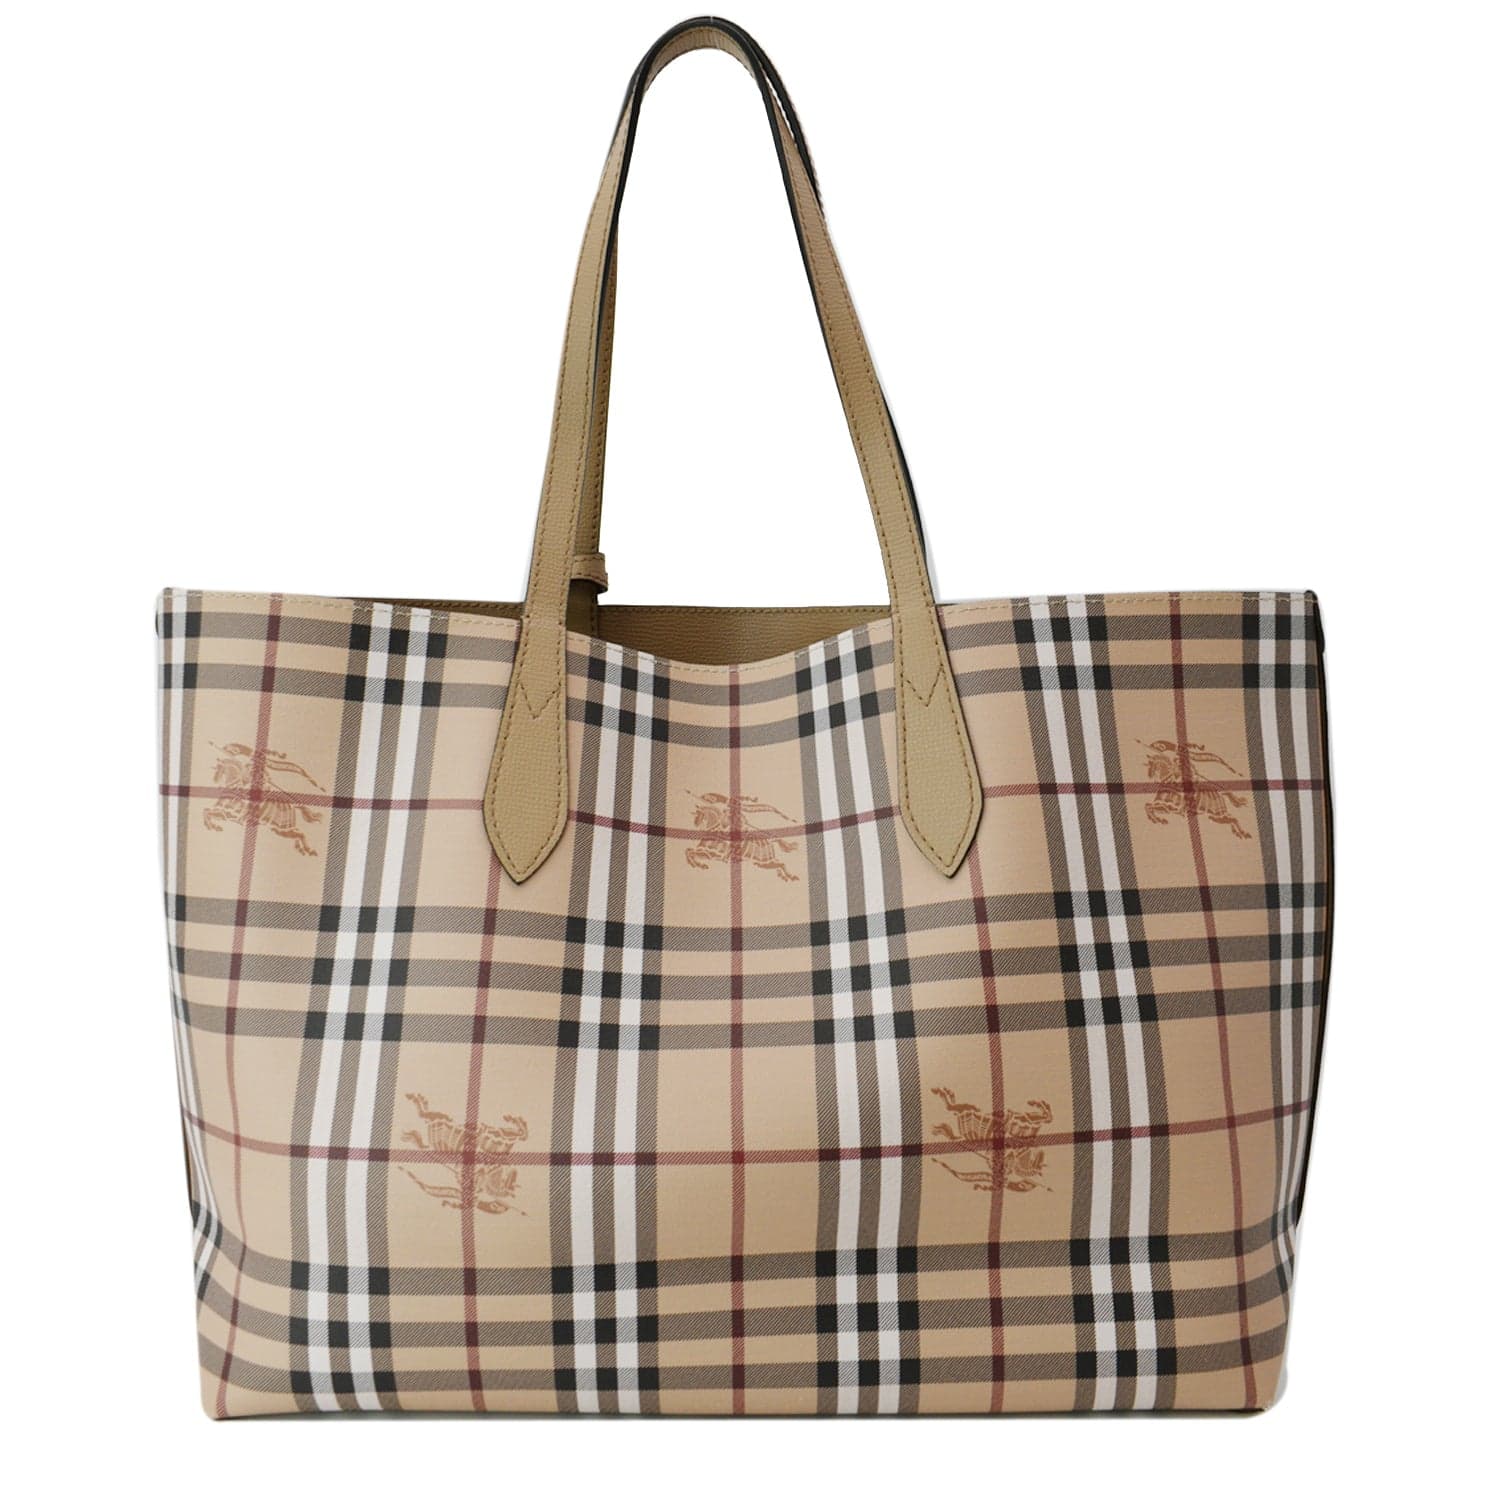 Bags, Authentic Burberry Reversible Large Leather Tote